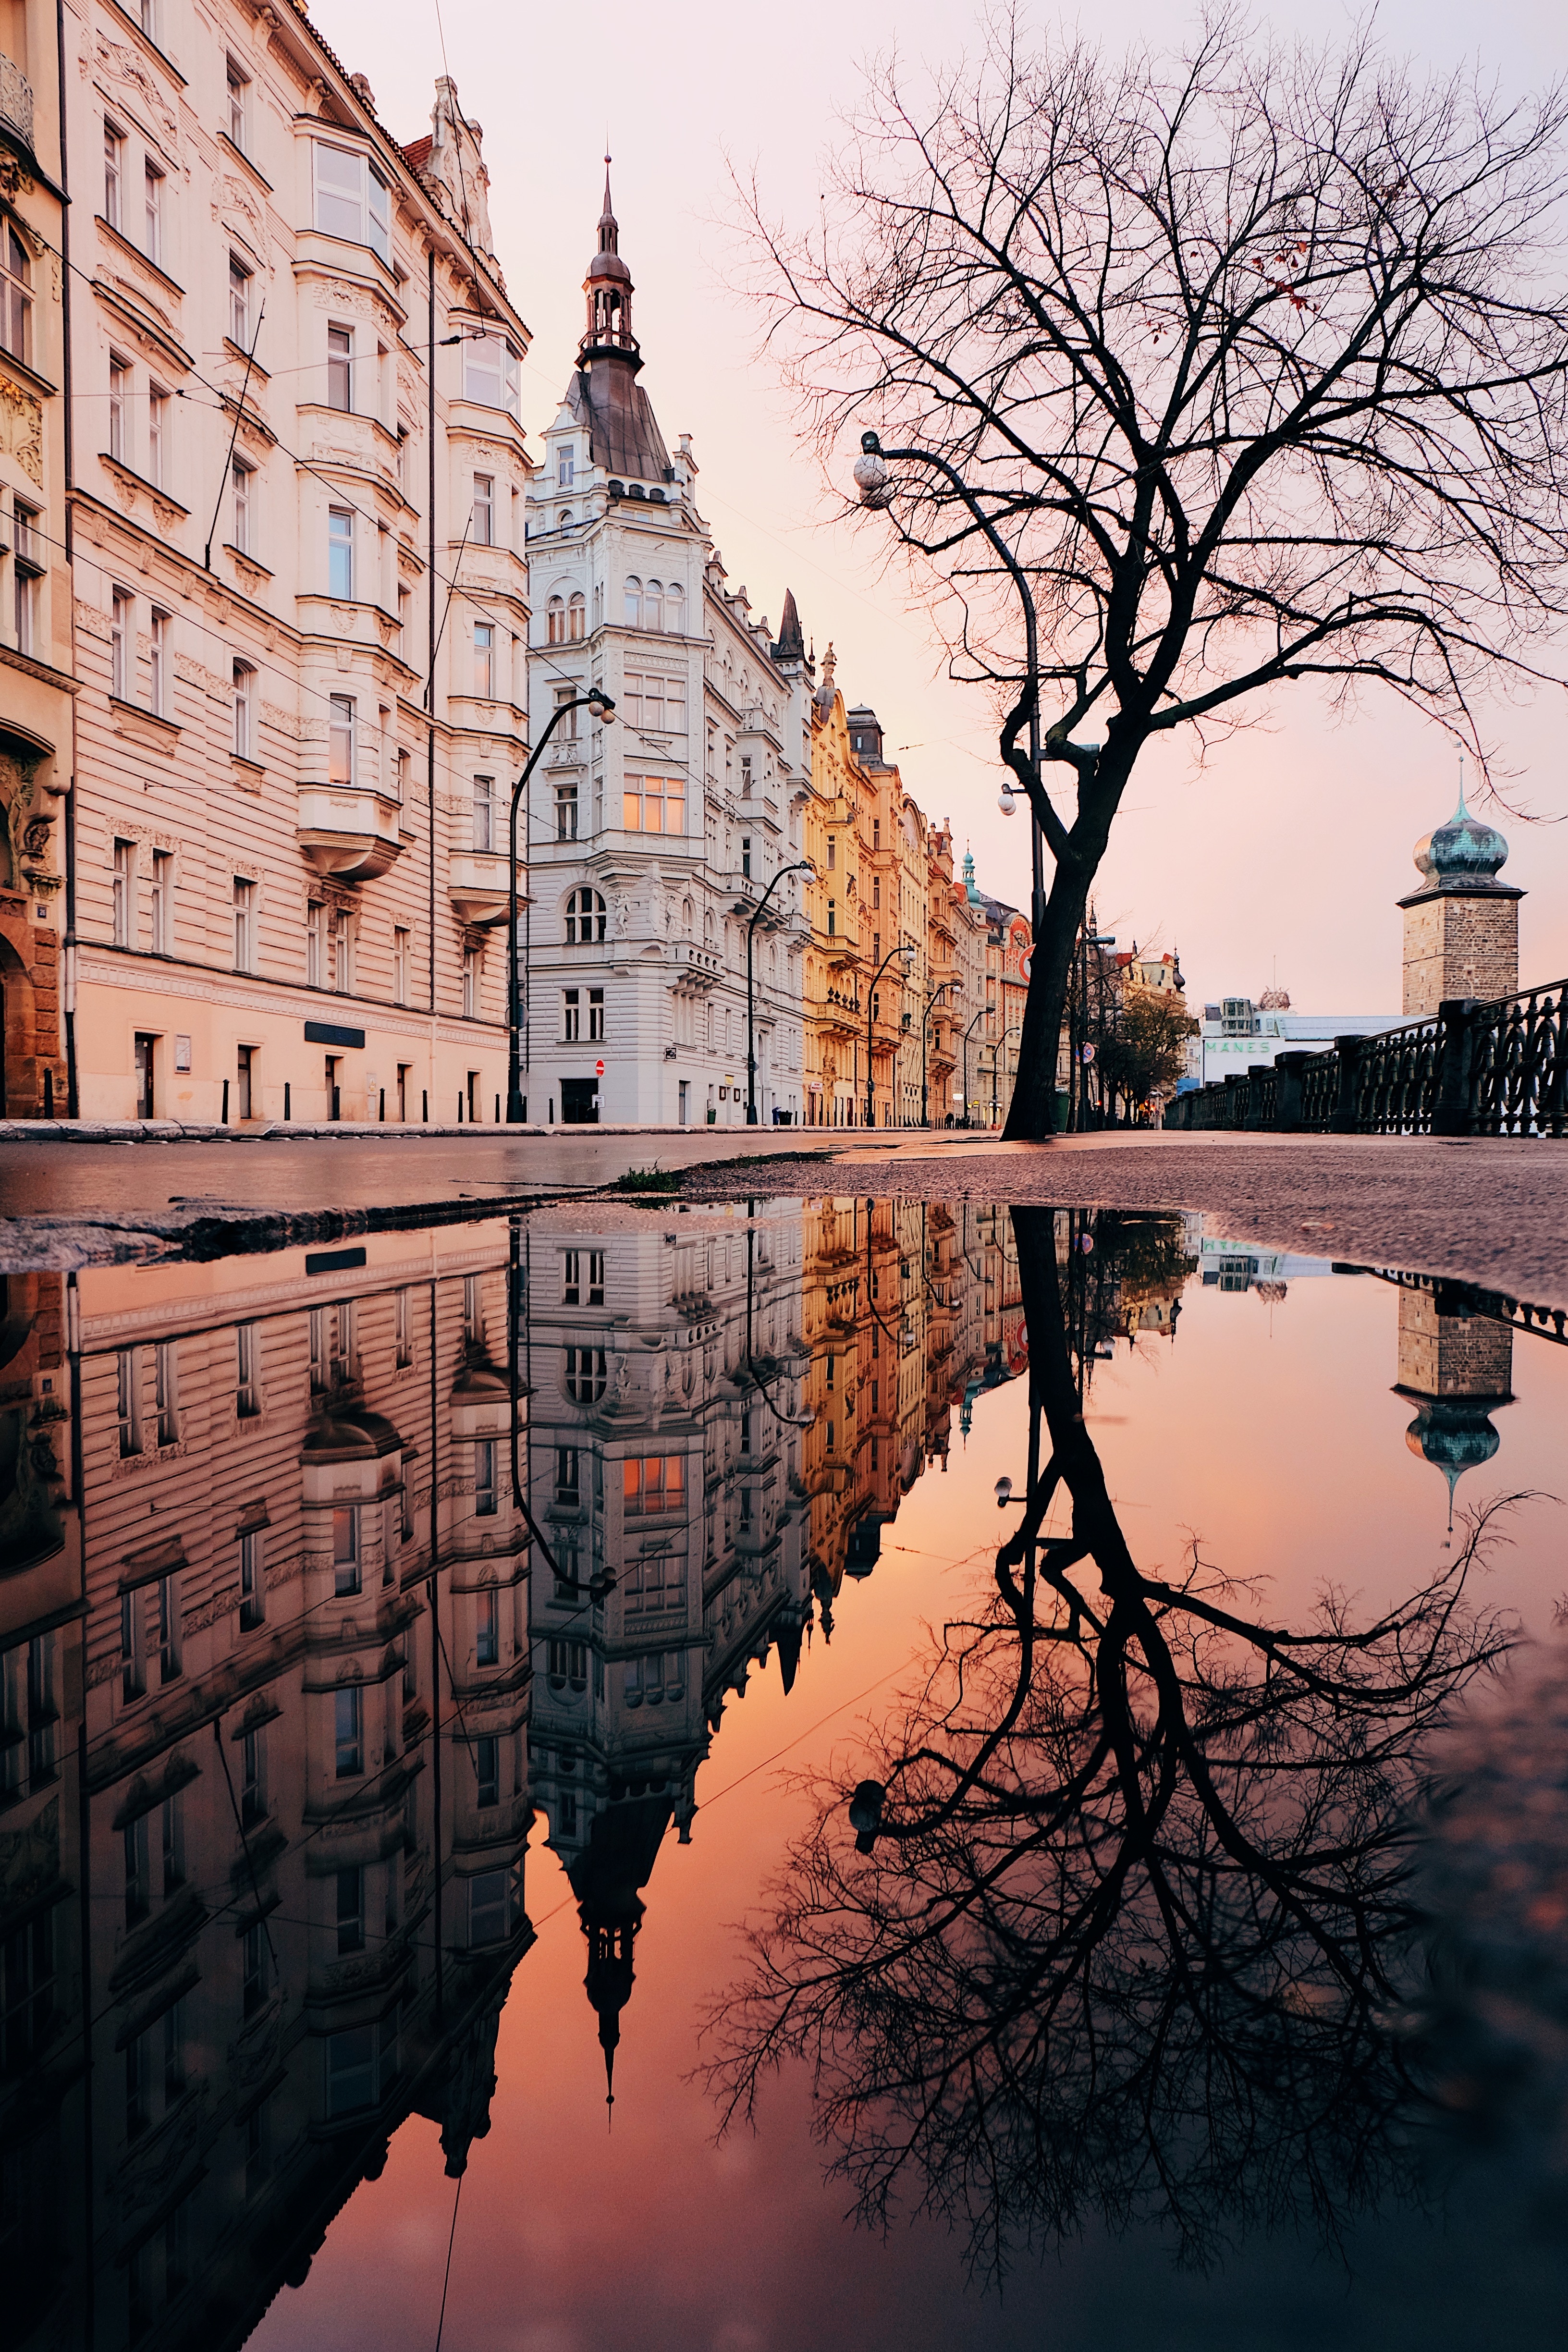 Tall, old buildings and a tree reflected in a puddle in the street.